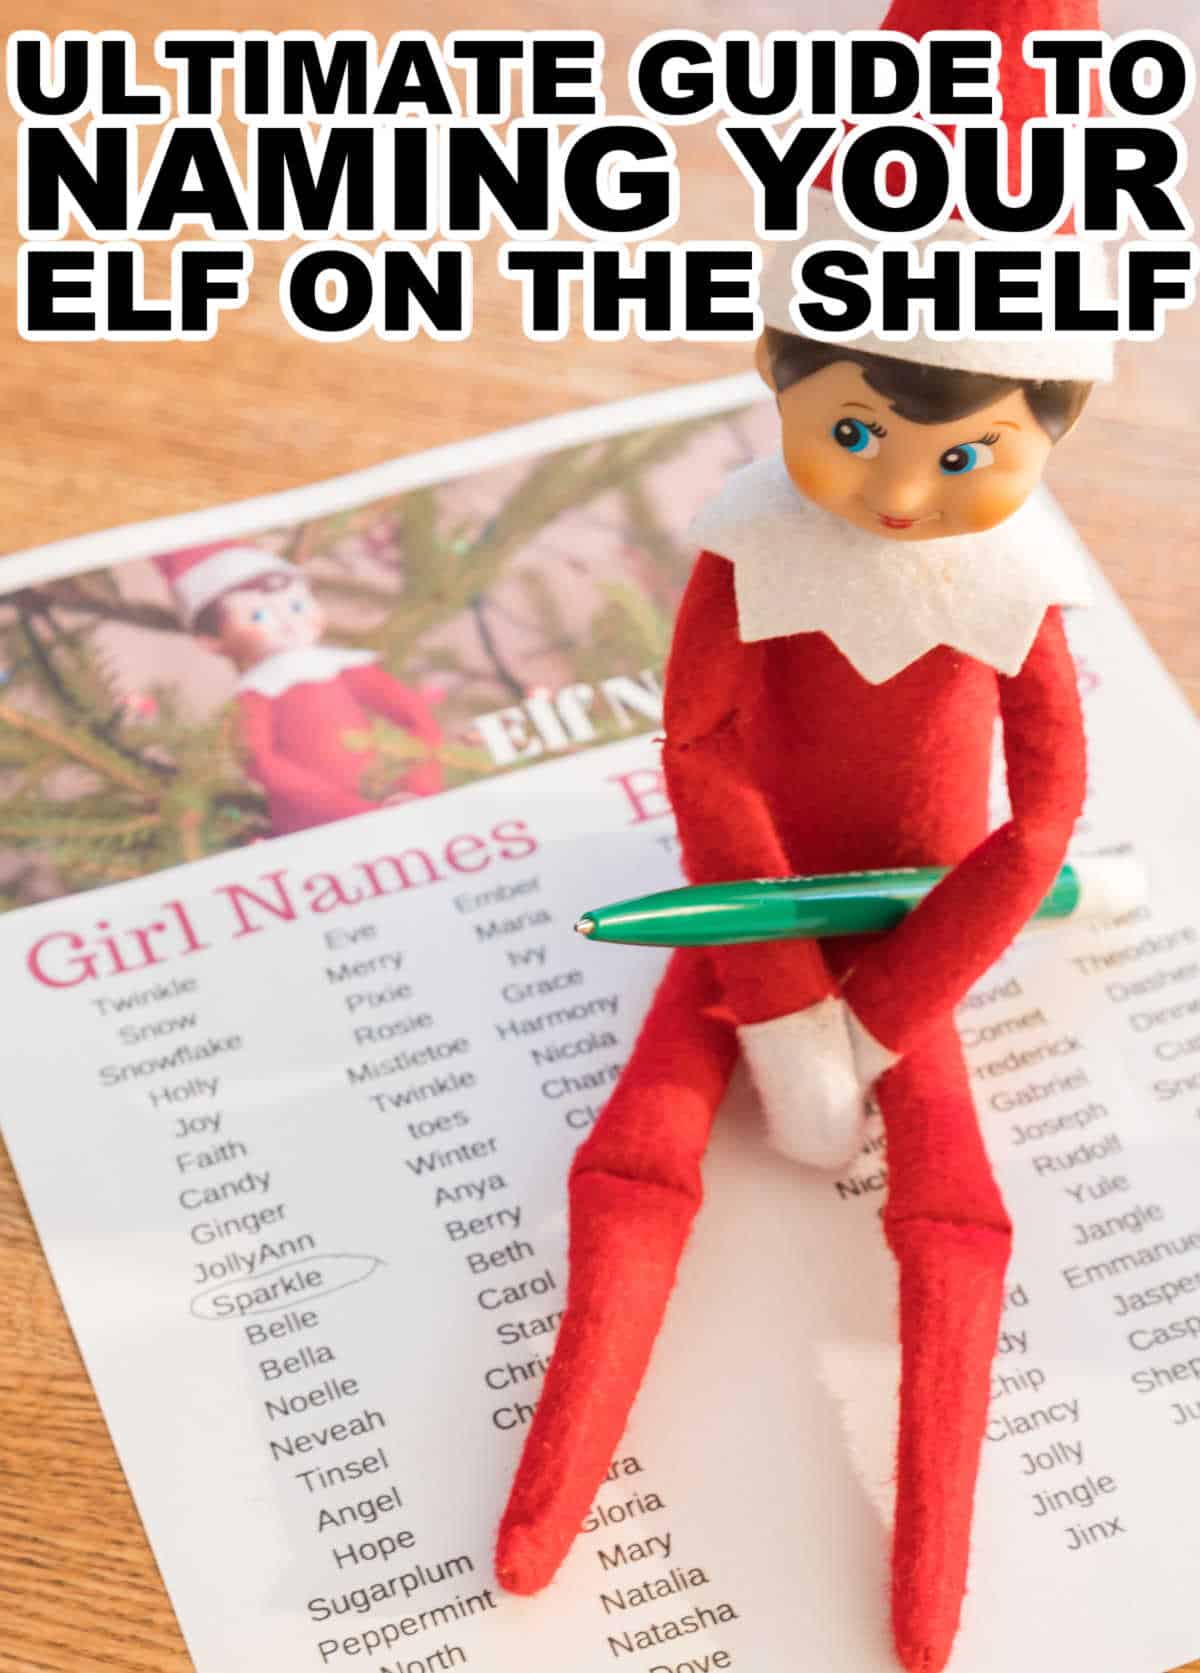 The ultimate guide to naming your elf on the shelf. Elf on the shelf sitting with the Elf names printable.